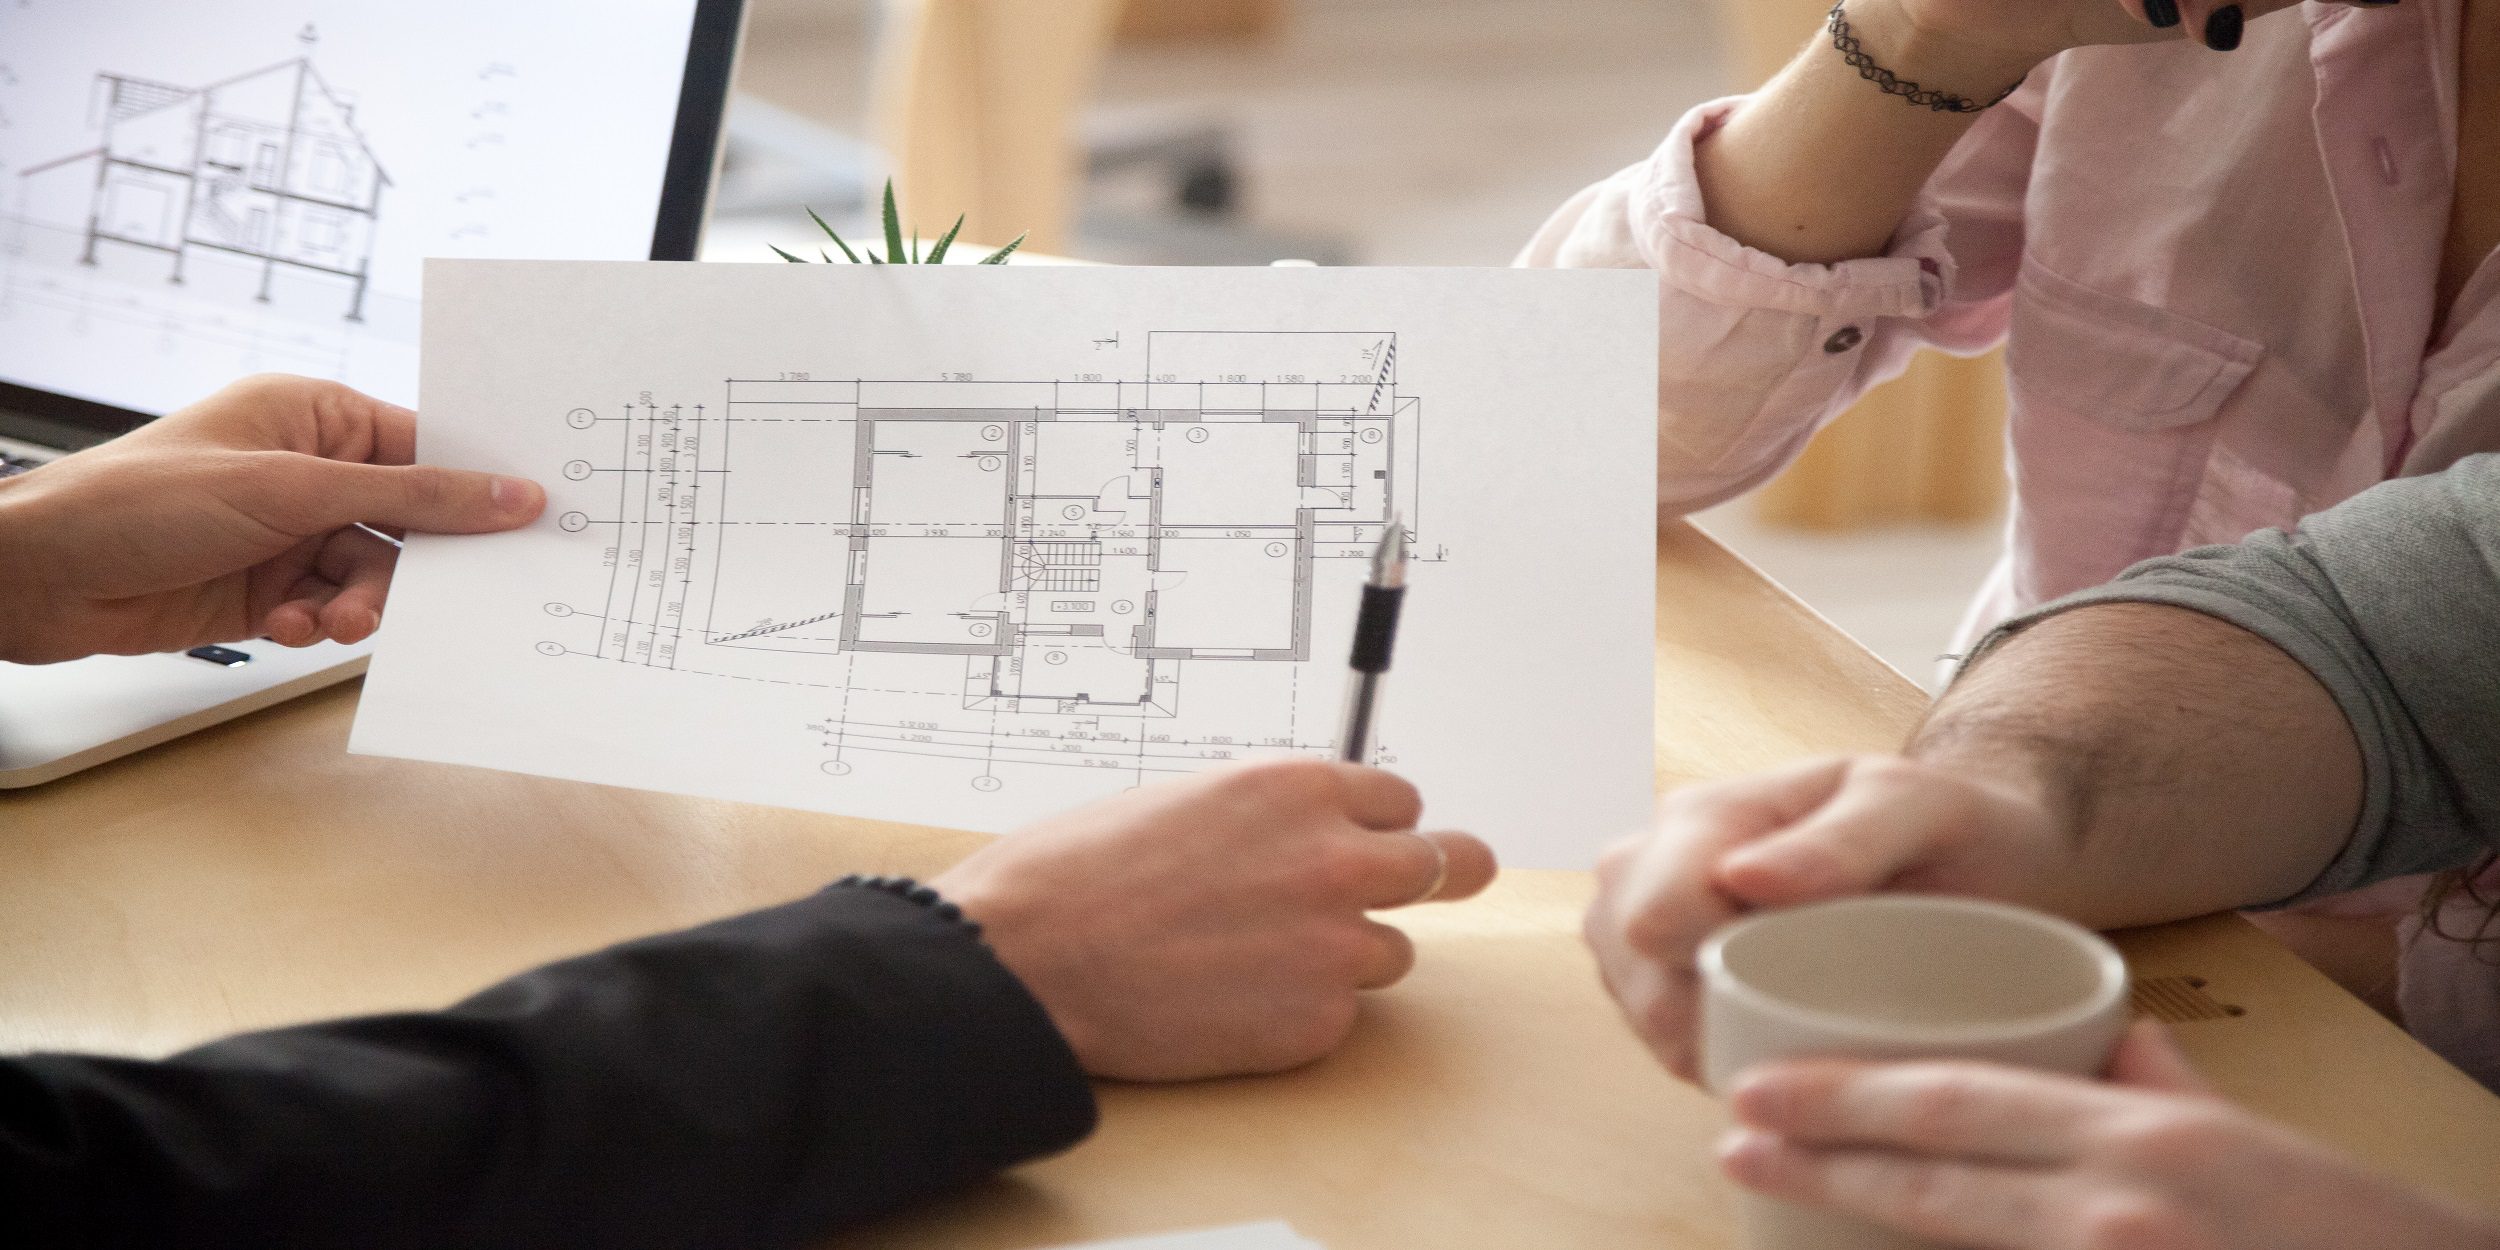 Design and Construction Guidance
